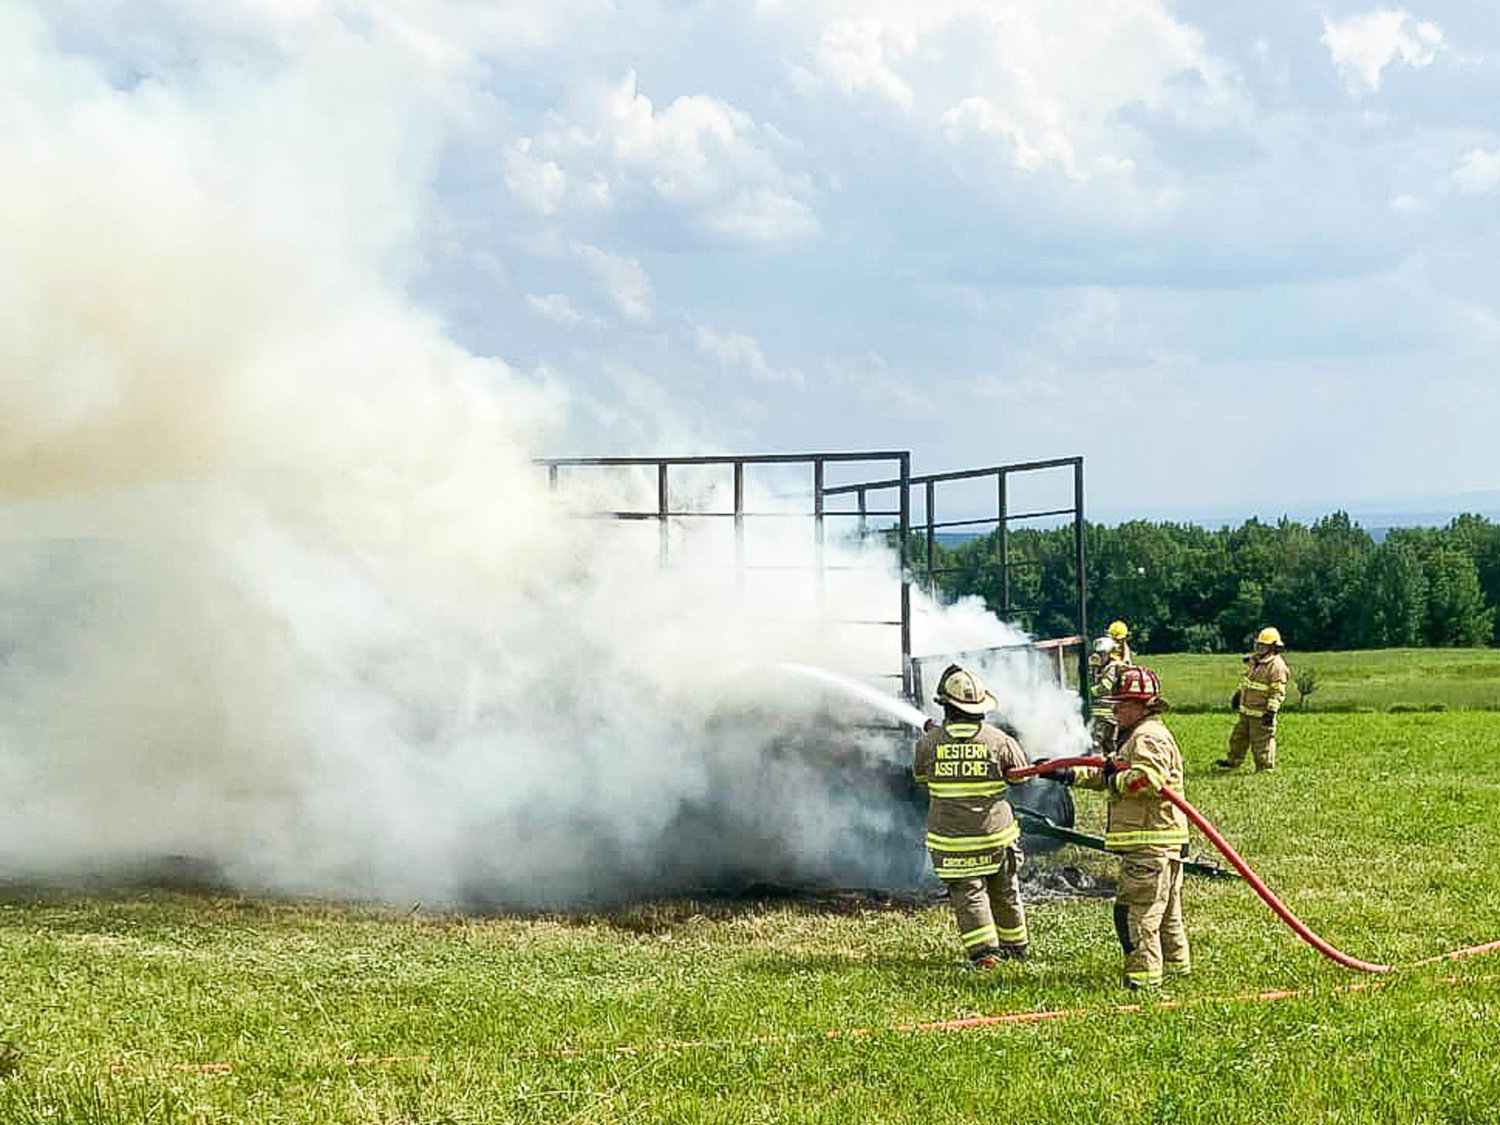 Town of Western firefighters douse a hay wagon fire on Quaker Hill Road at about 3:30 p.m. on Sunday. Temperatures reached nearly 90 degrees Sunday afternoon, and fire officials said hay is sometimes known to spontaneously combust when packed tightly in the heat. Once doused, authorities said the hay was dug out and spread across the ground to water down again.